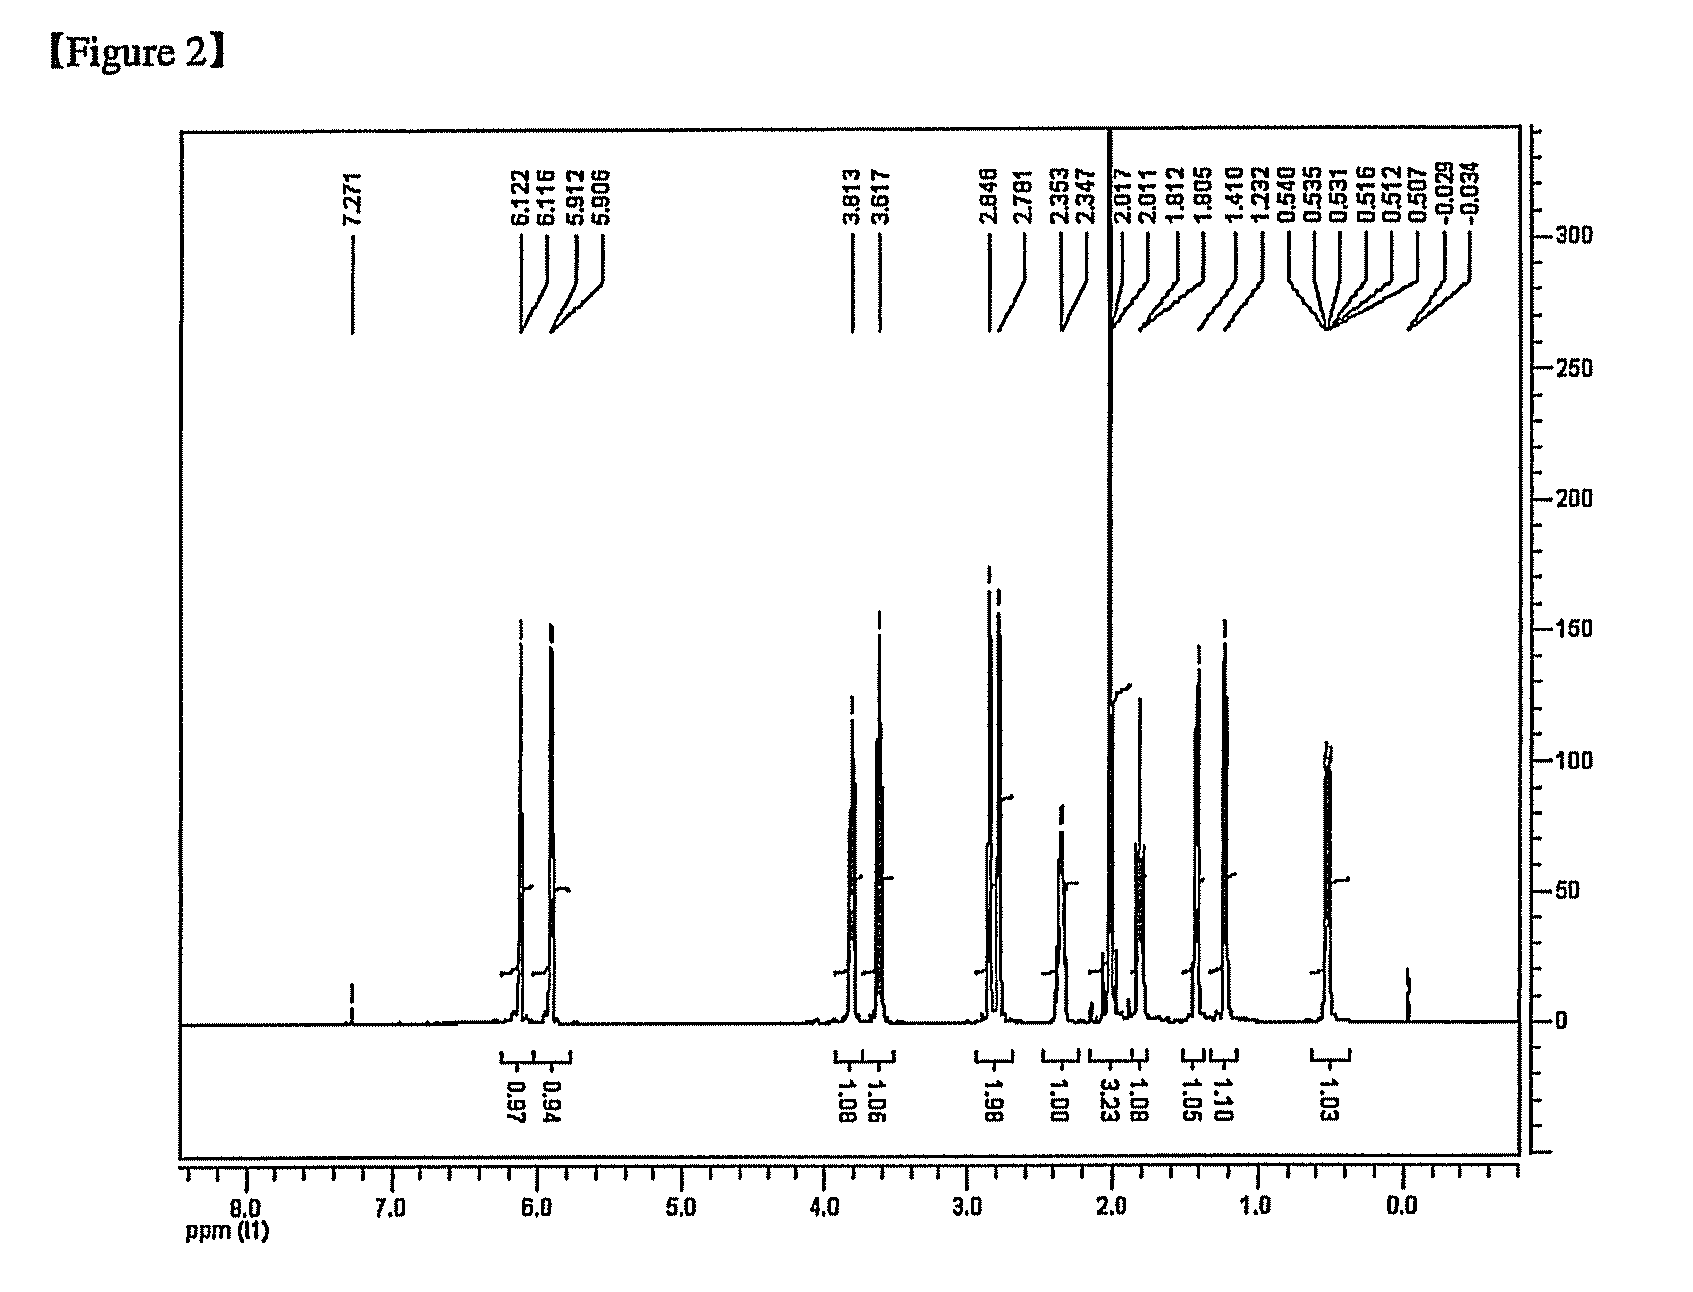 Method for producing norbornene monomer composition, norbornene polymer prepared therefrom, optical film comprising the norbornene polymer, and method for producing the norbornene polymer